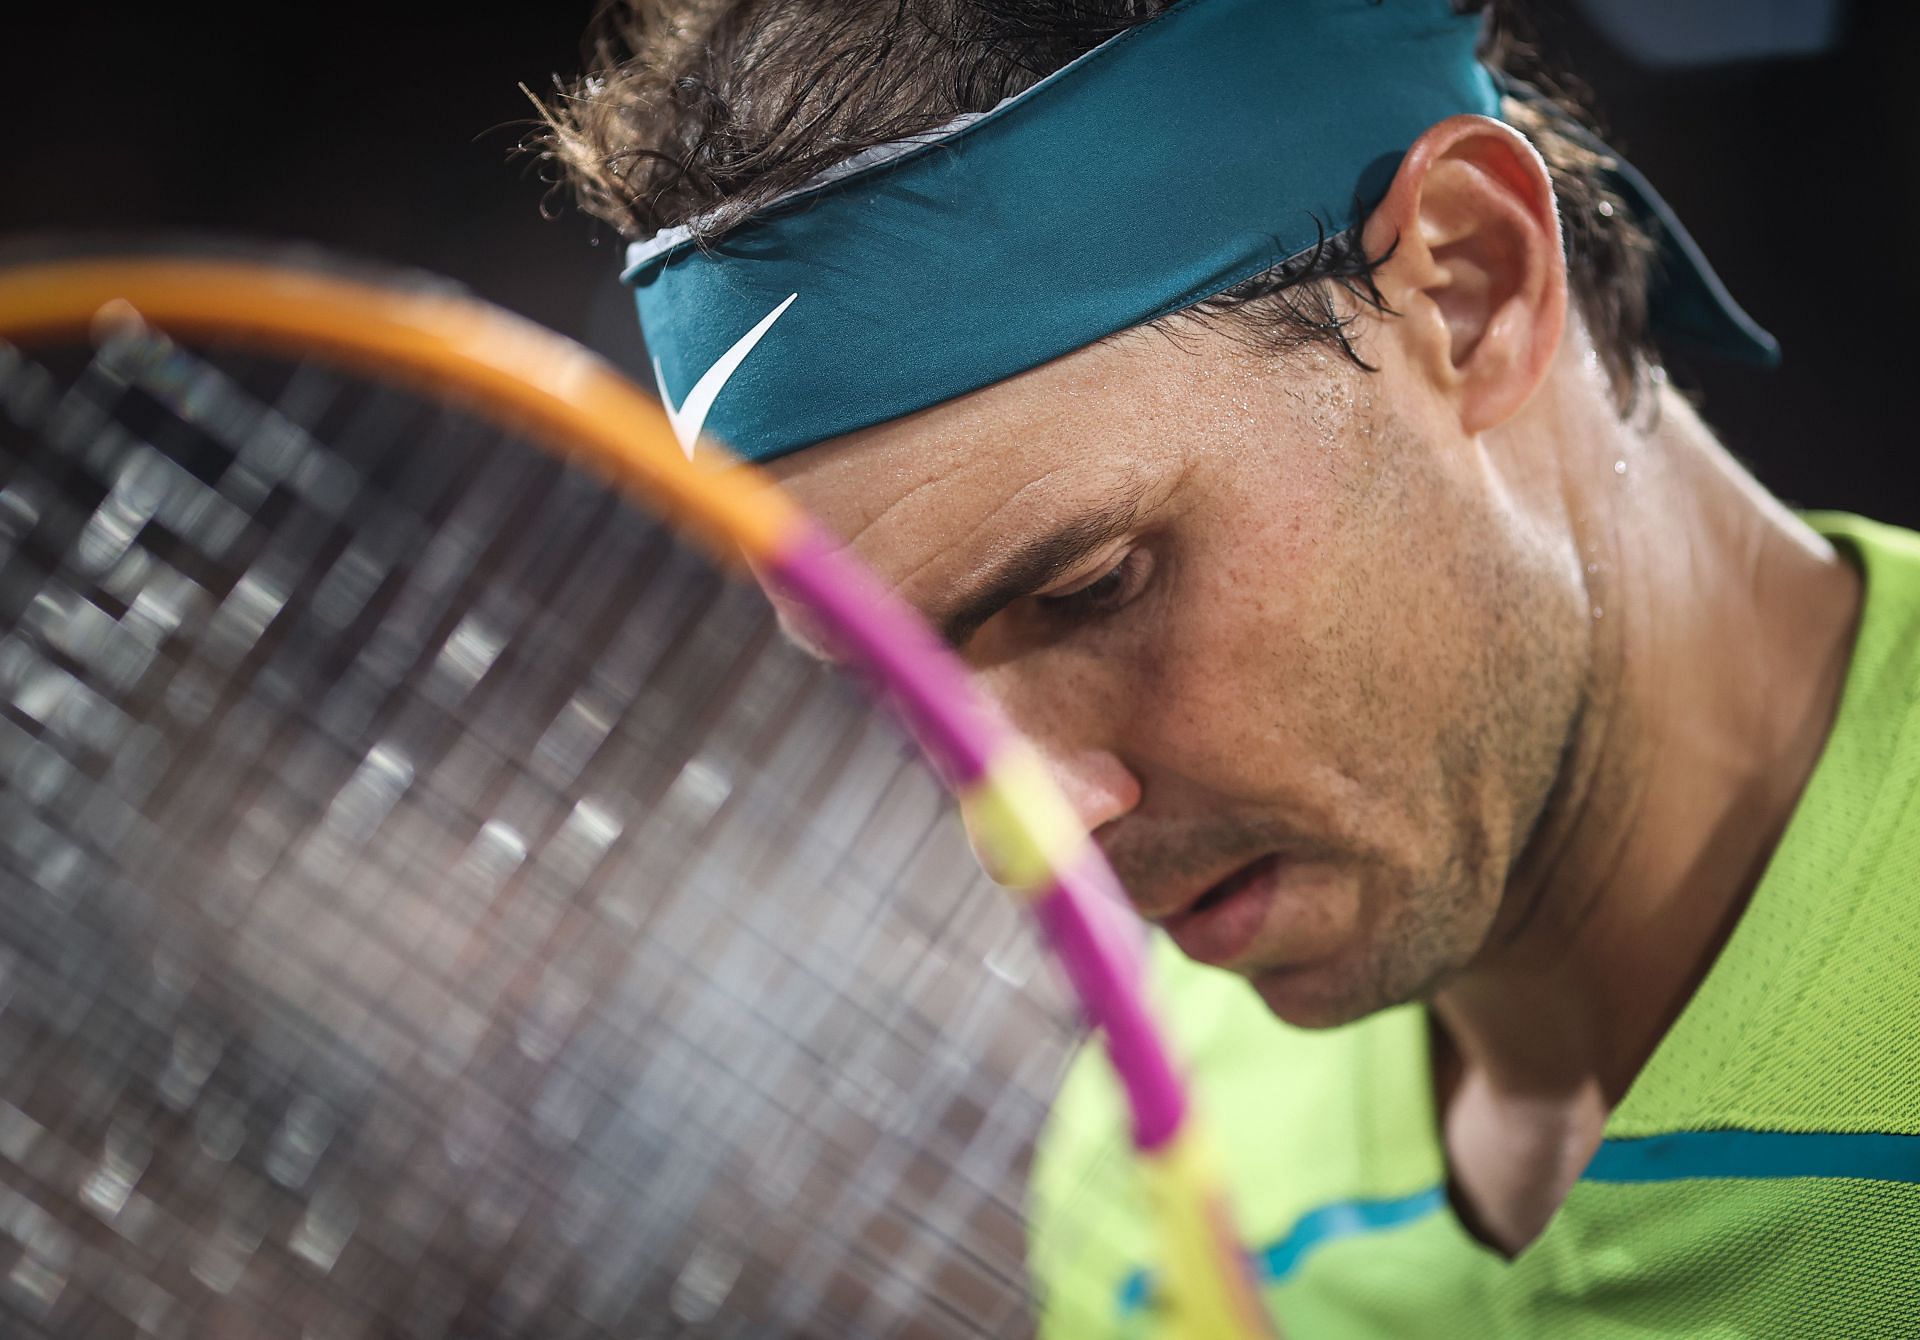 Rafael Nadal has said that he does not like playing in the night session